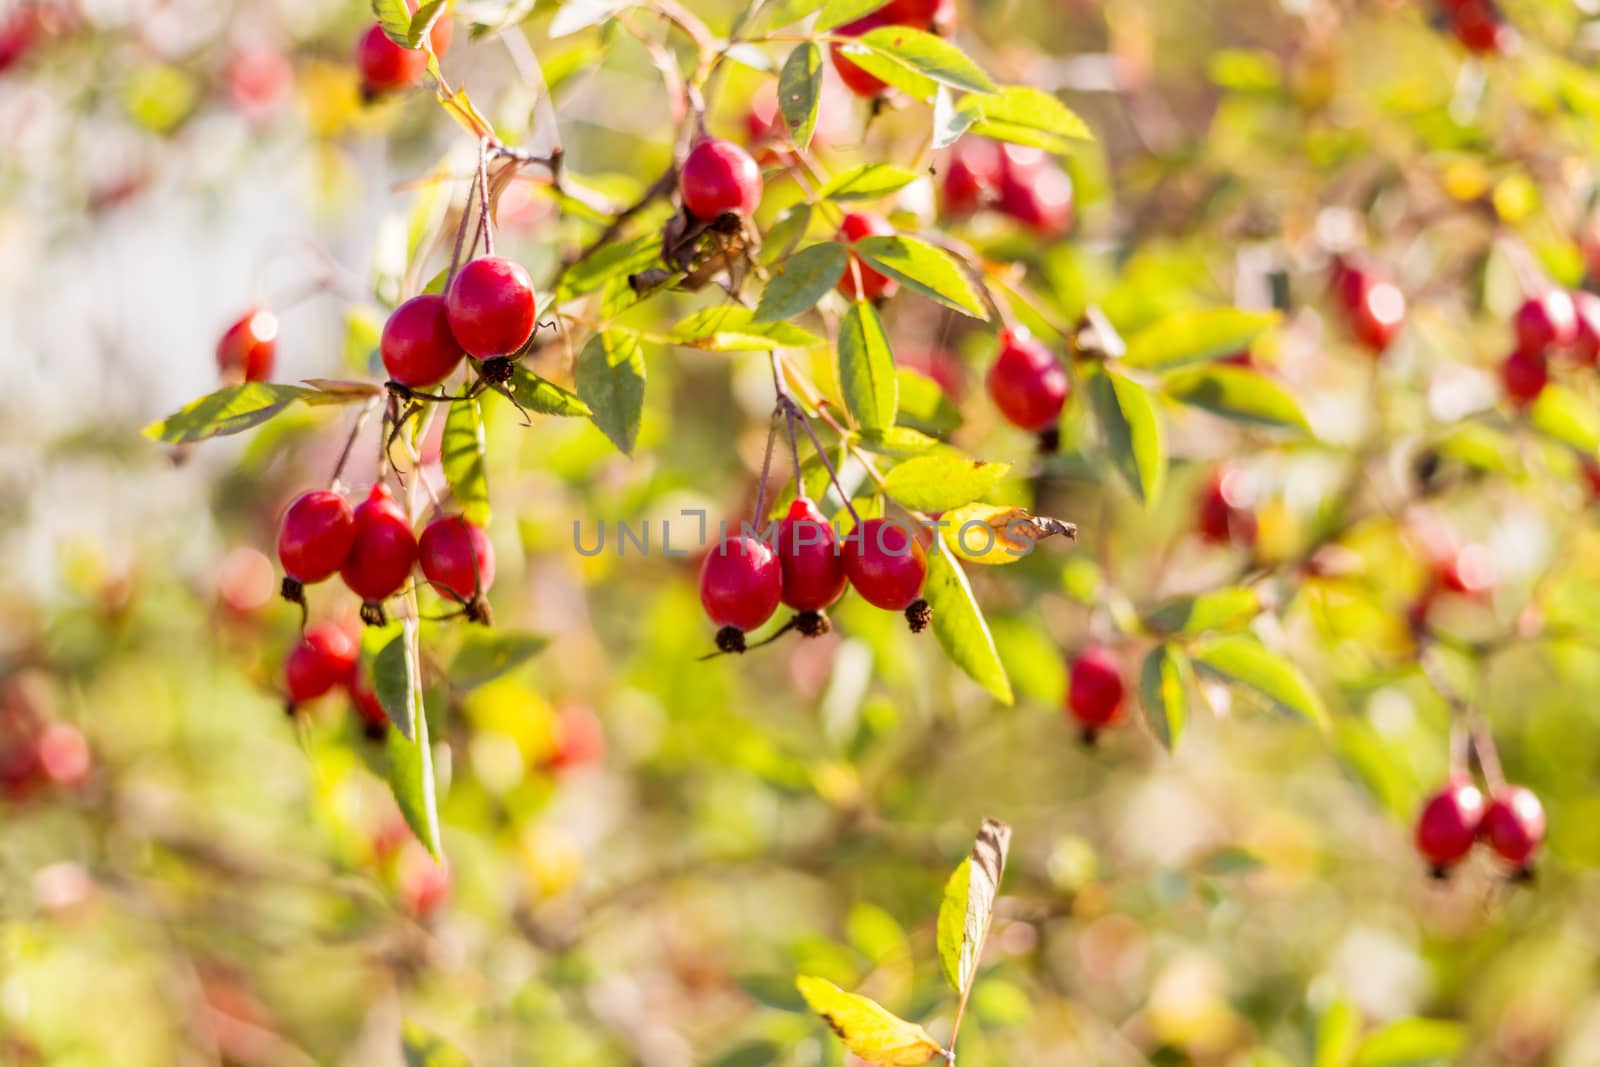 .Ripe rosehip berries on a branch in the sun. Golden autumn harvesting.